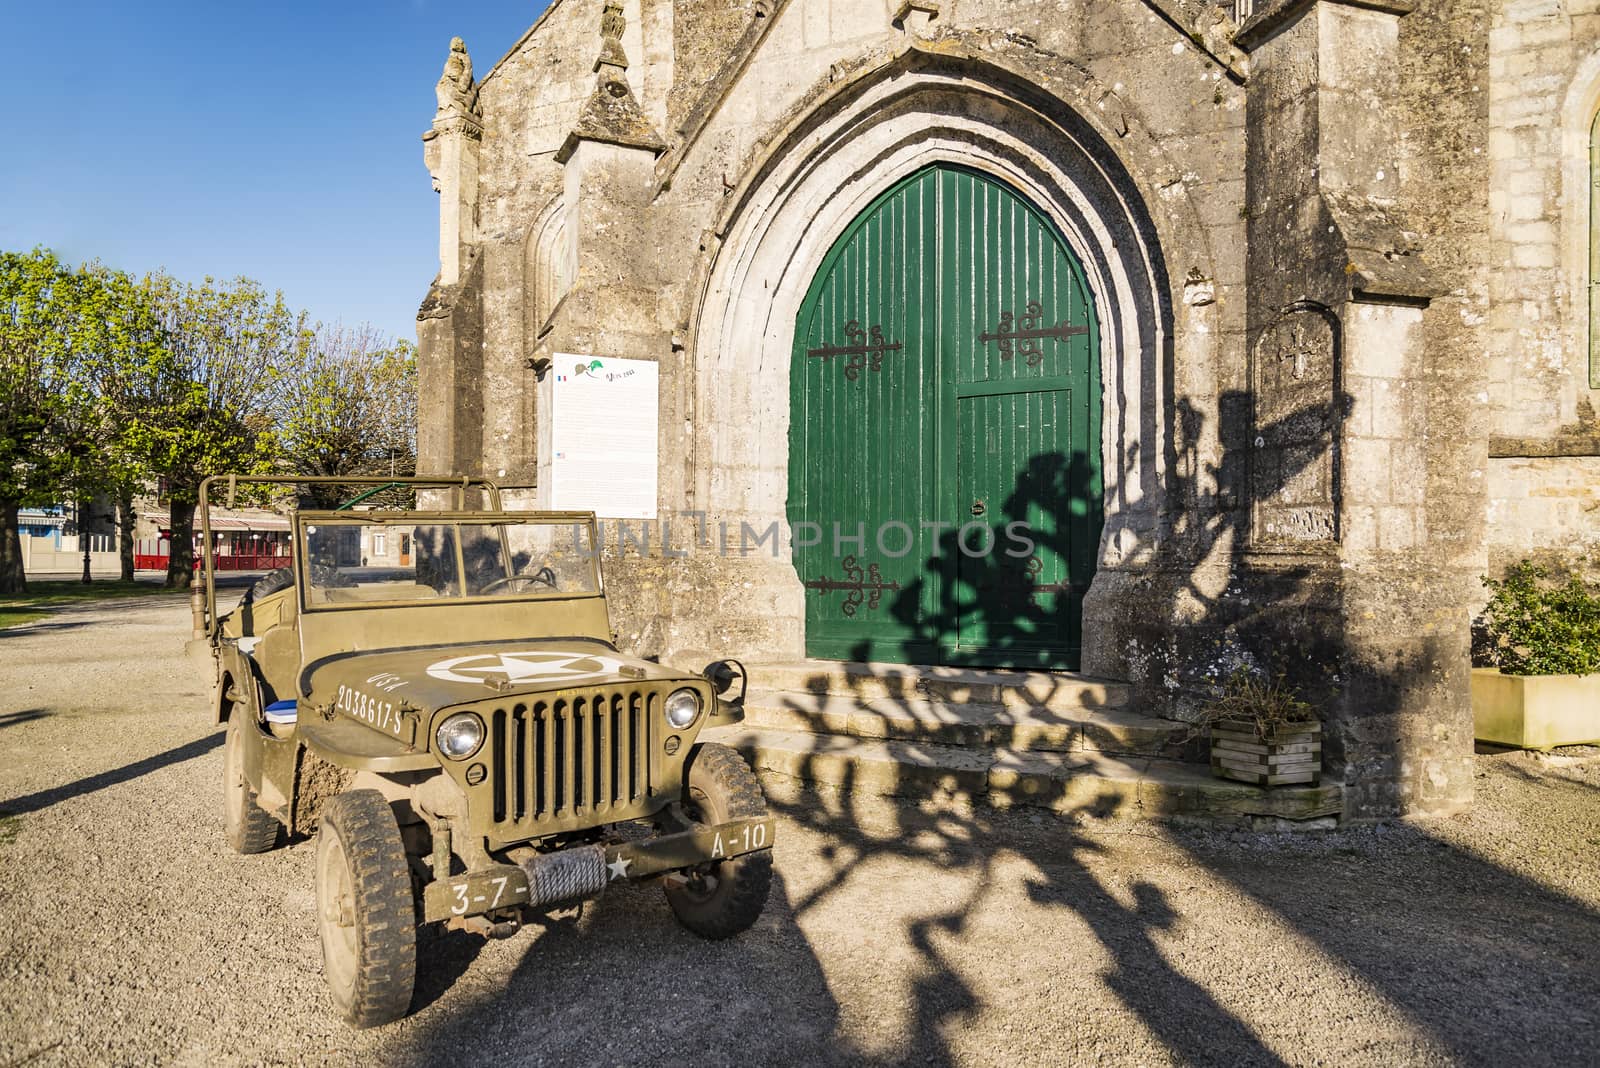 Church and america Jeep in Sainte Marie du Mont, Manche, Normandy, France